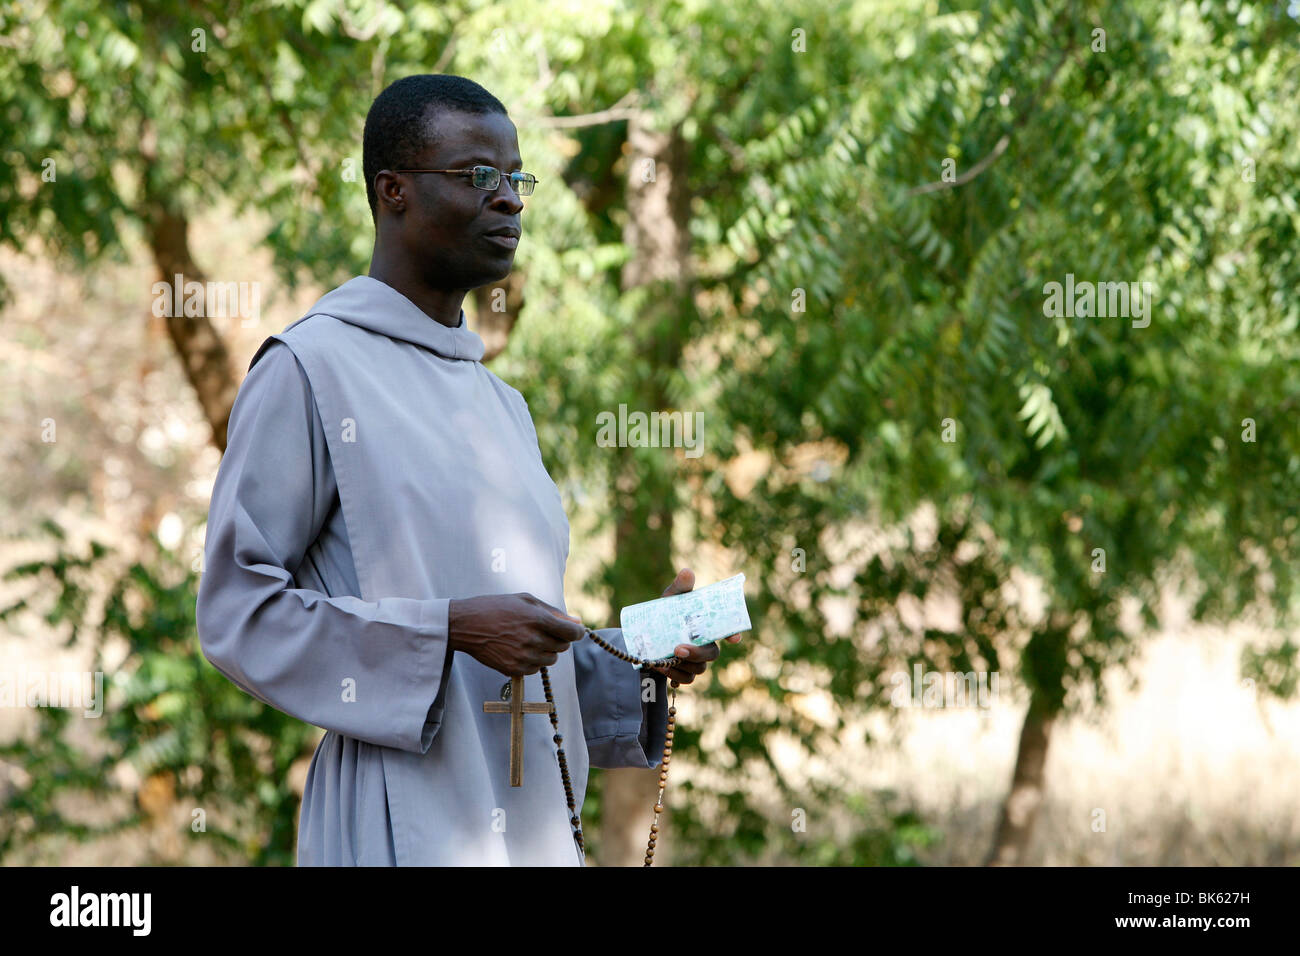 Catholic friar holding rosary and prayer book, Popenguine, Thies, Senegal, West Africa, Africa Stock Photo